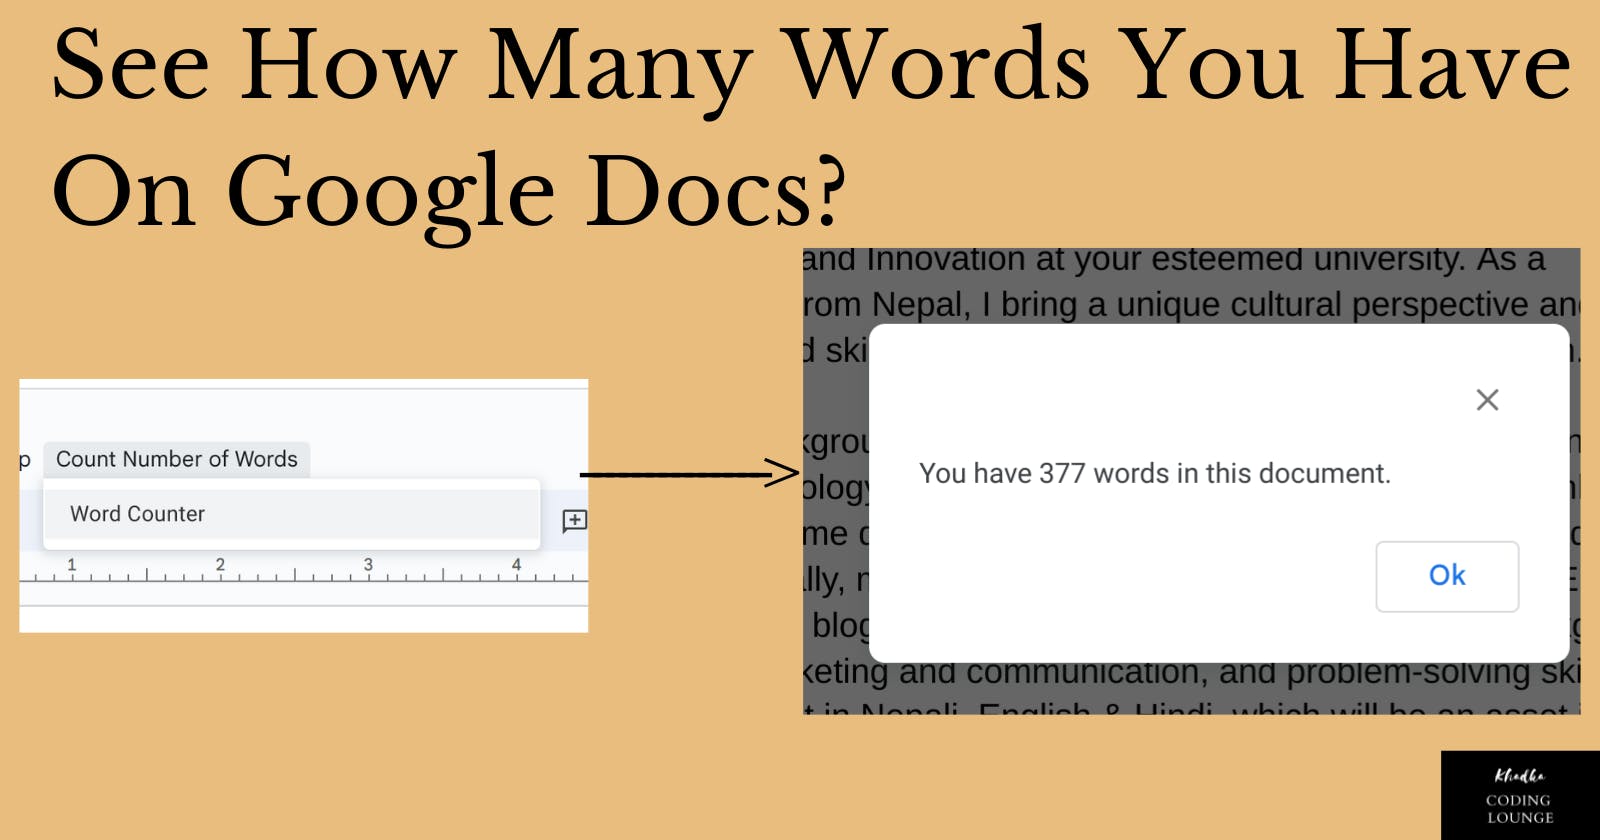 How to see how many words you have on google docs with Google Apps Script?